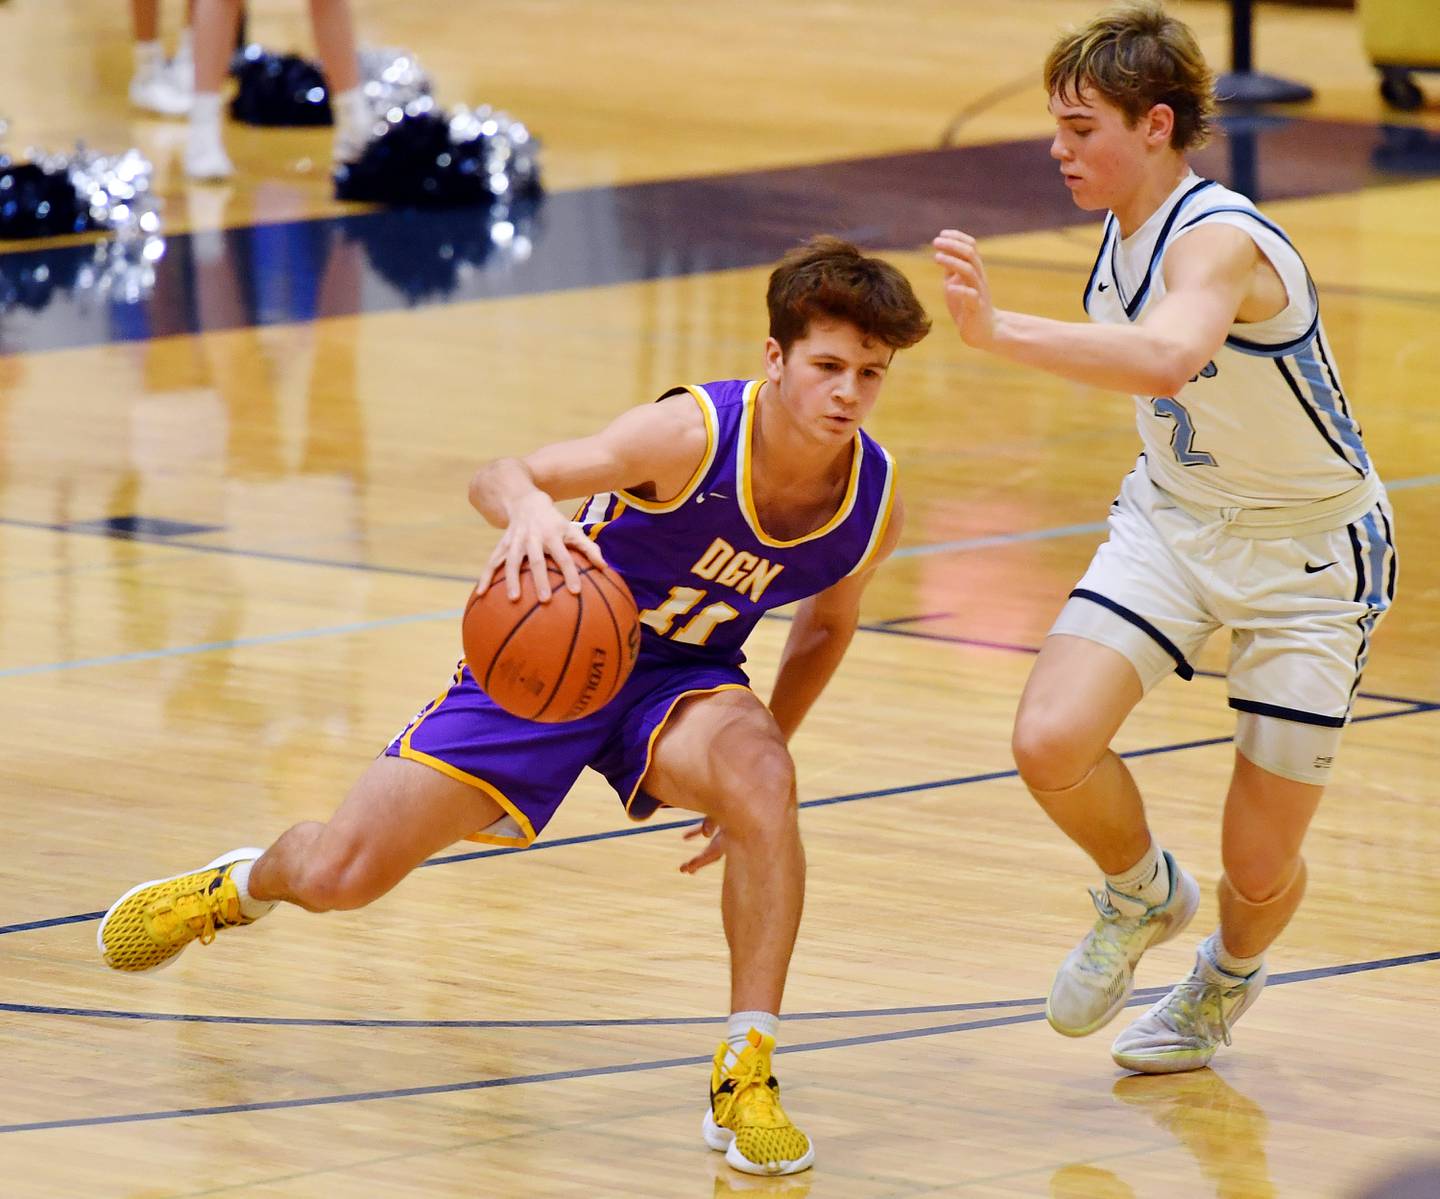 Downers Grove North's Owen Thulin (11) drives past Downers Grove South's Will Potter during a crosstown game on Dec. 17, 2022 at Downers Grove South High School in Downers Grove .